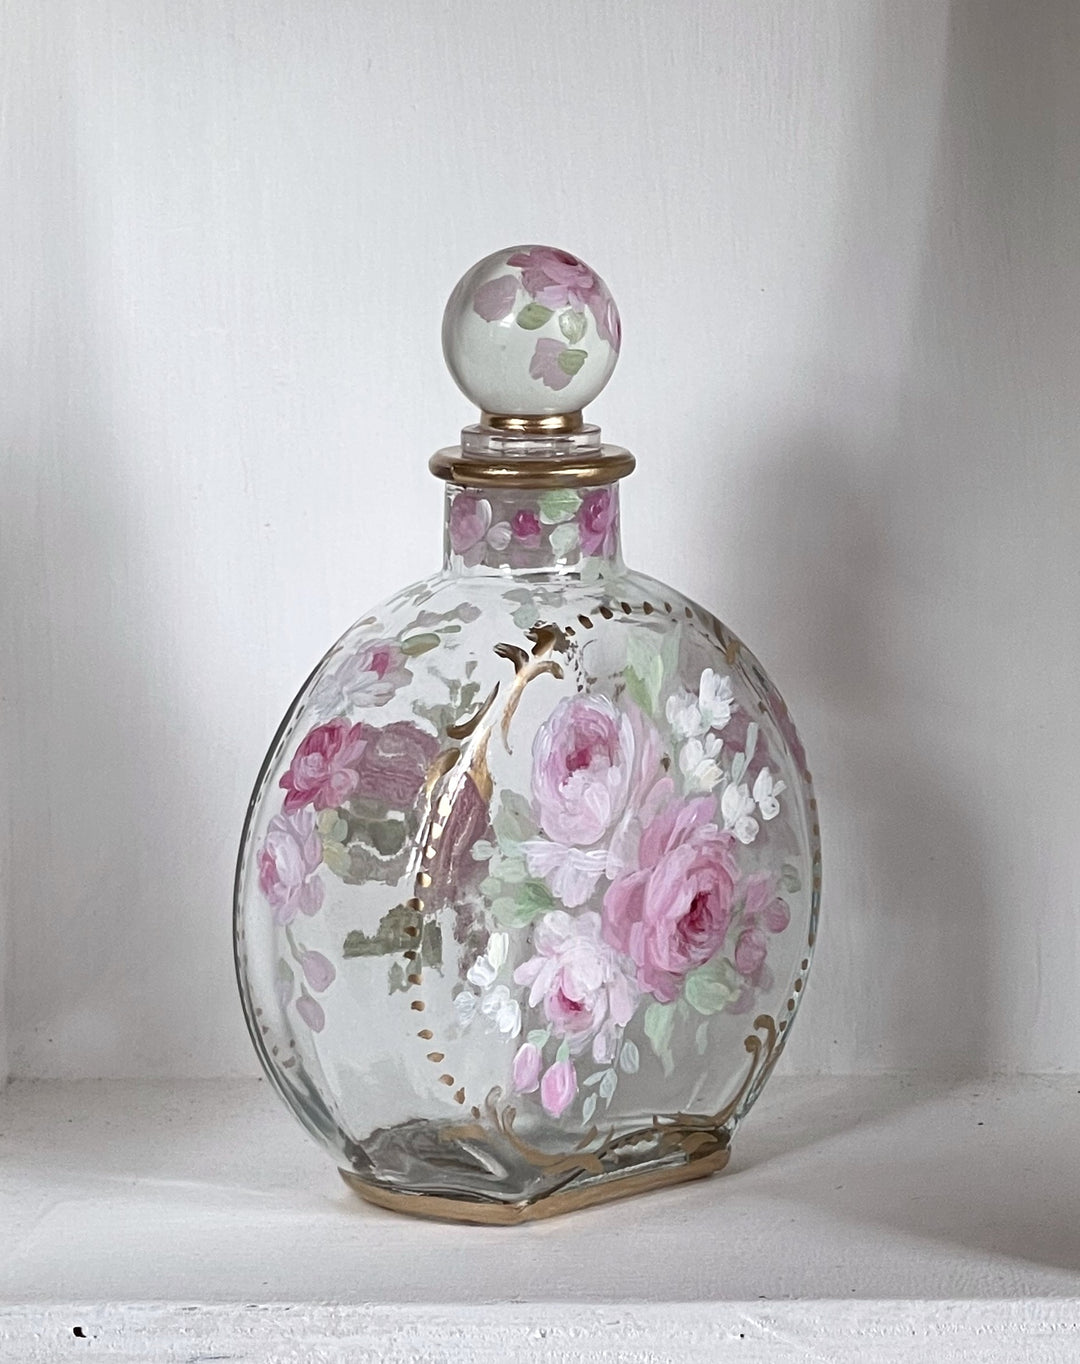 Shabby Chic Hand Painted Pink Roses Glass Perfume Bottle Original by Debi Coules